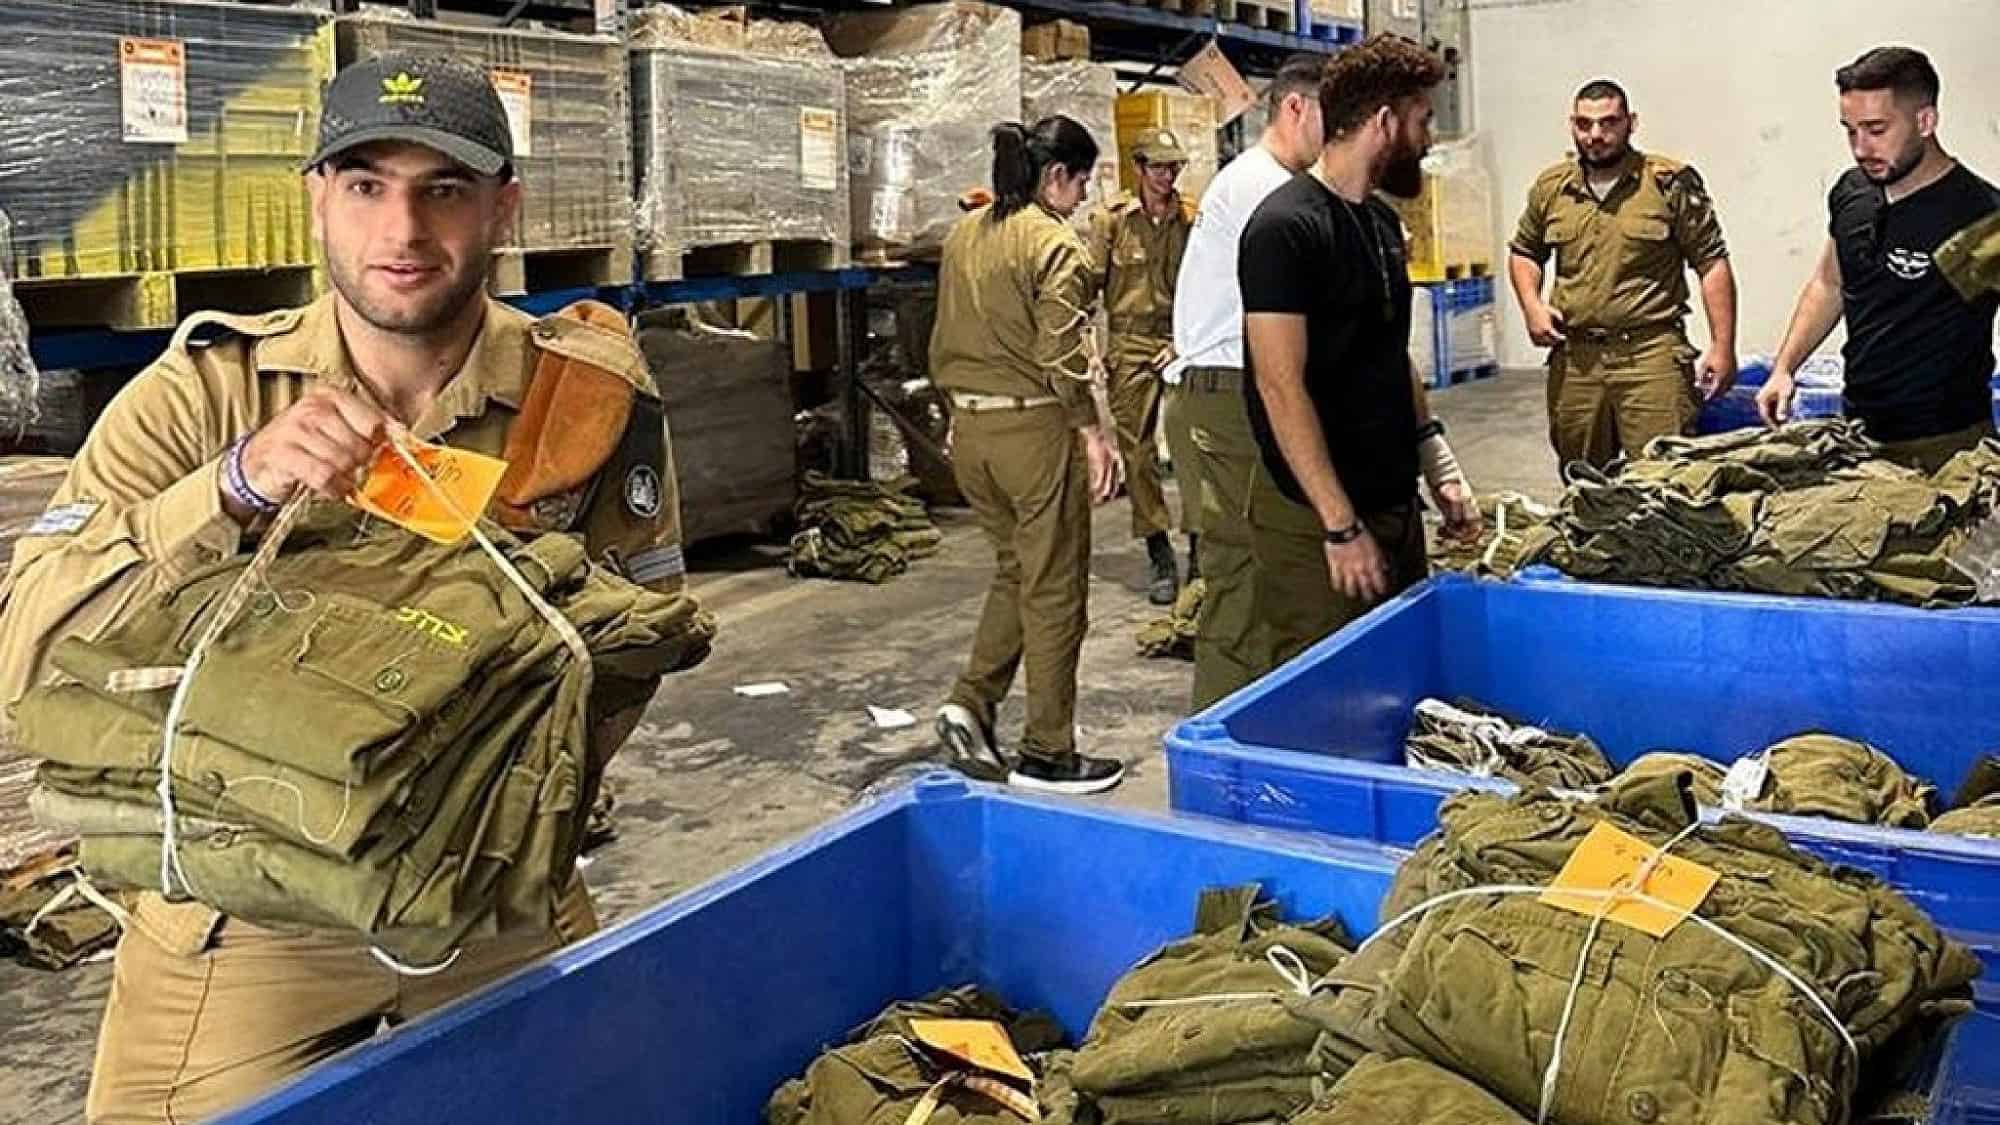 IDF soldiers with special needs pack equipment at a logistics center in Ramla. Credit: Special in Uniform.